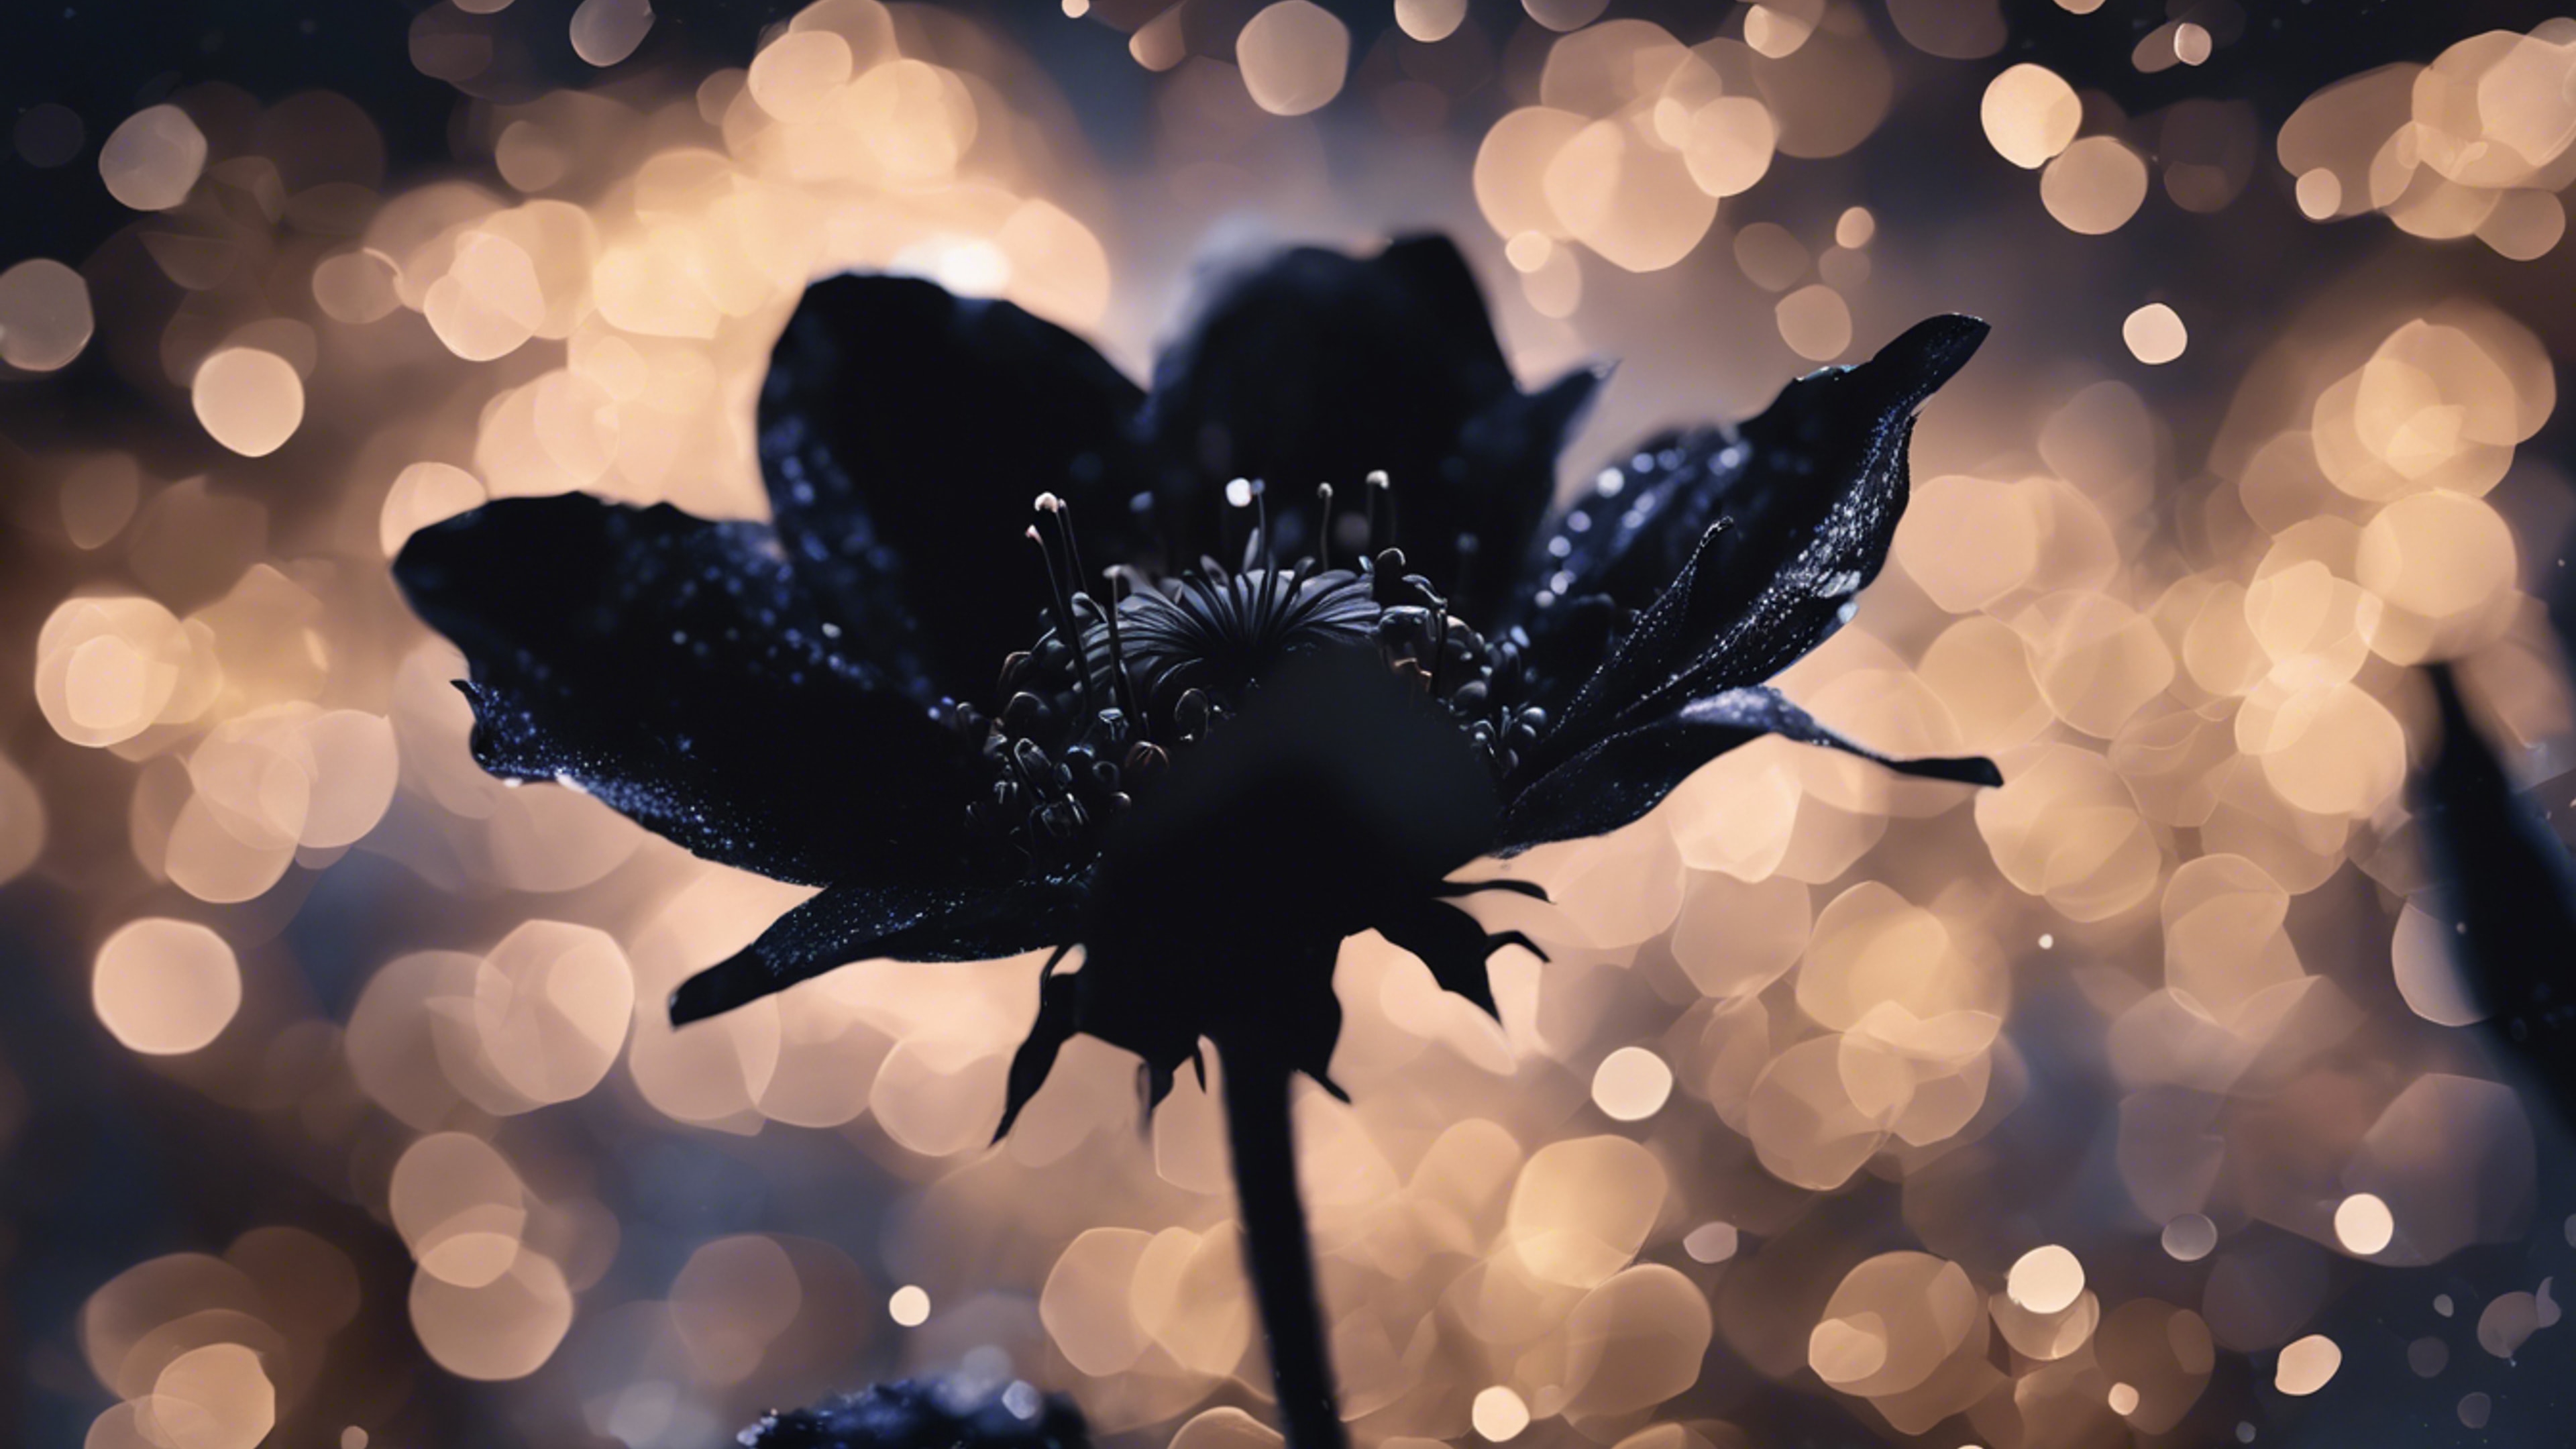 A silhouette of a night-blooming black flower, its petals slightly shimmering beneath a starlit sky. Tapet[42f6de17cdb14a3f8111]